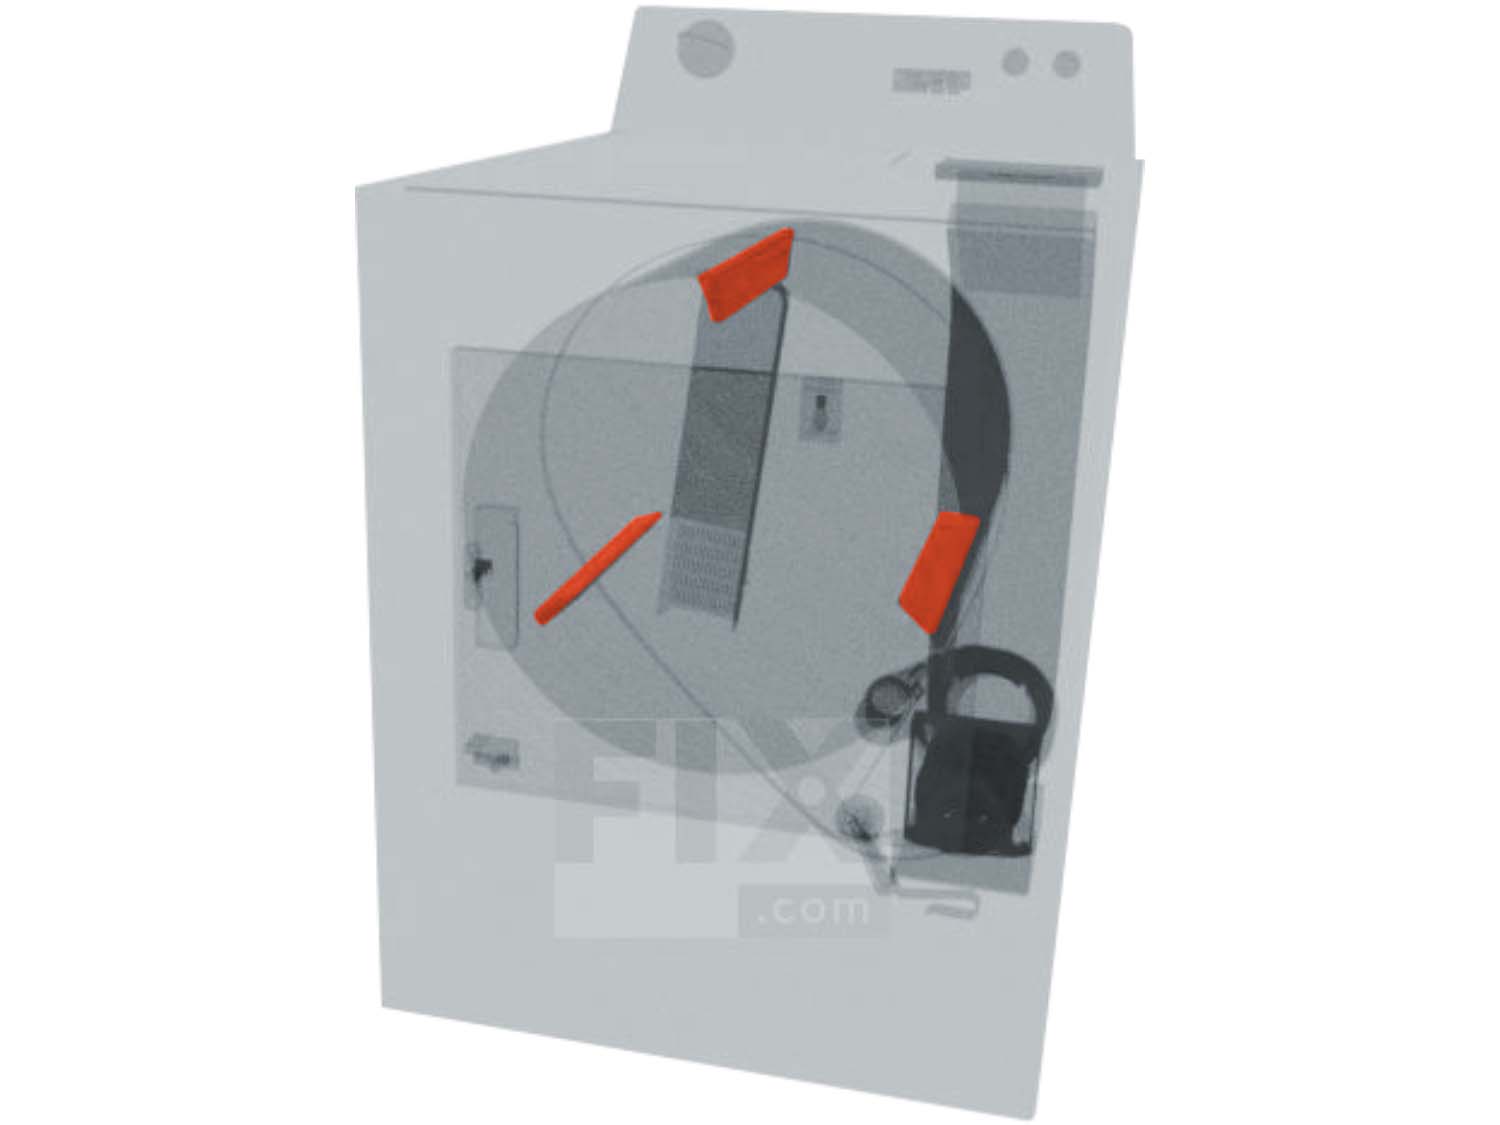 A 3D diagram showing the components of a dryer and specifying the location of the drum baffles